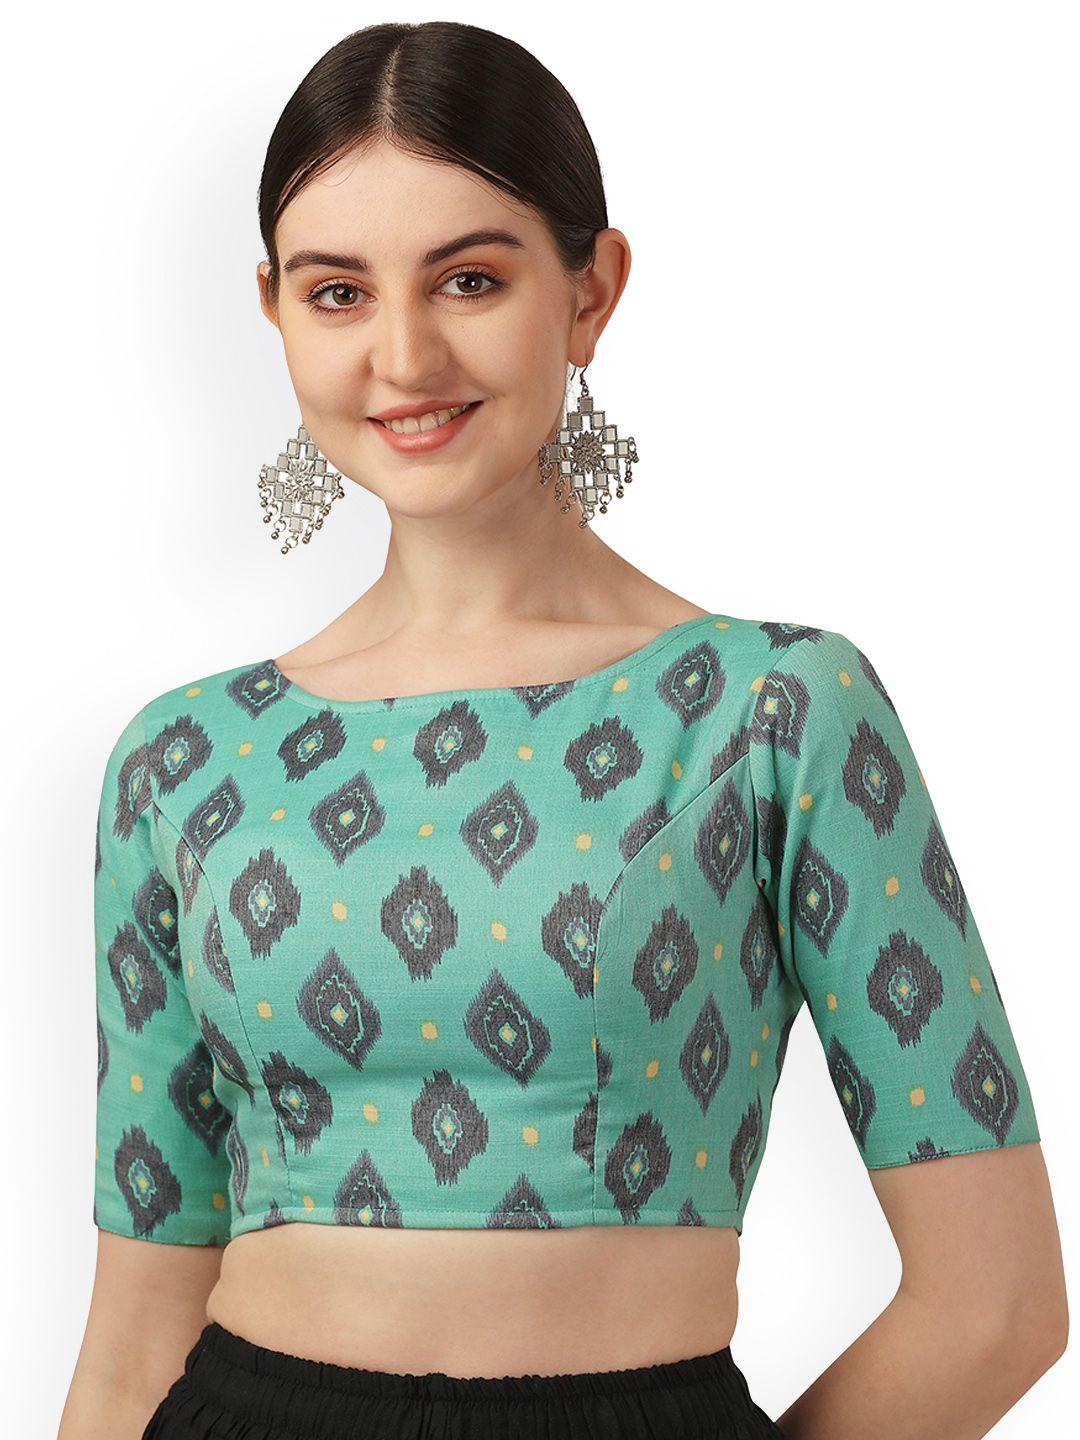 oomph! printed boat neck cotton saree blouse